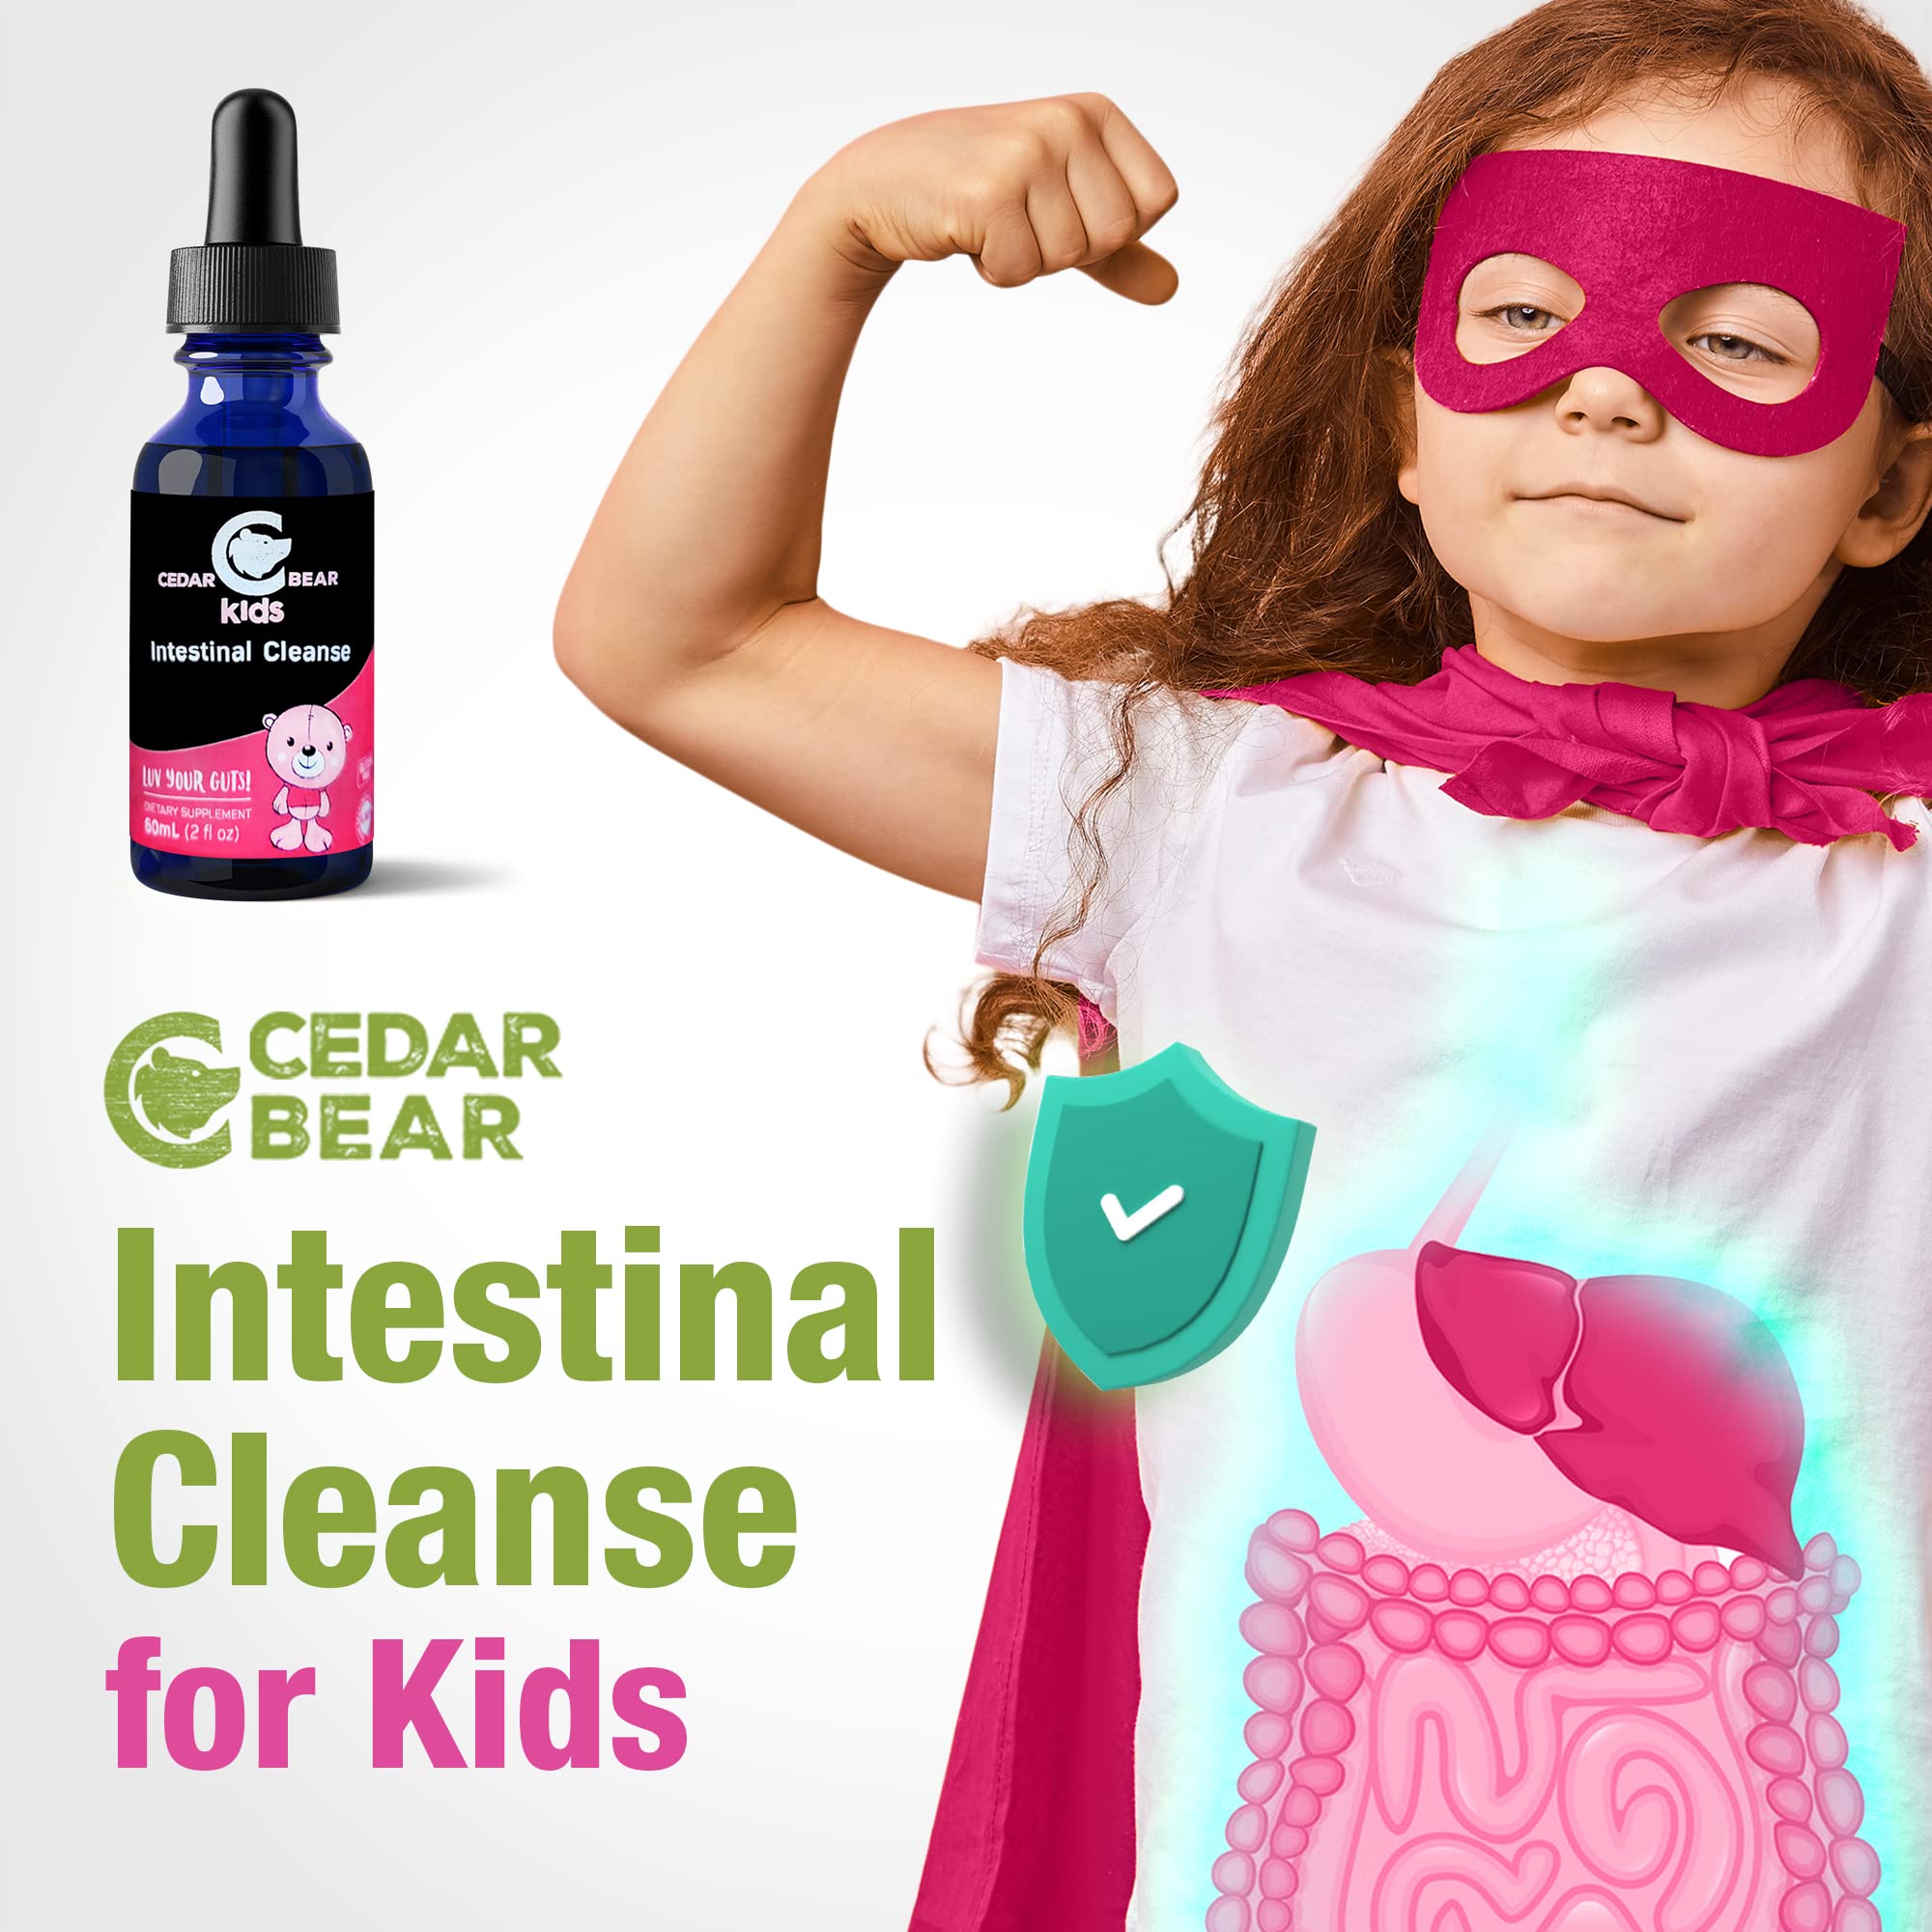 Cedar Bear - Intestinal Cleanse for Kids, Liquid Herbal Supplement for Detox Cleanse, Digestive Cleanse with Natural Herbs, Alcohol-Free Gut Cleanse Drops for Children, 2 fl oz / 60 ml